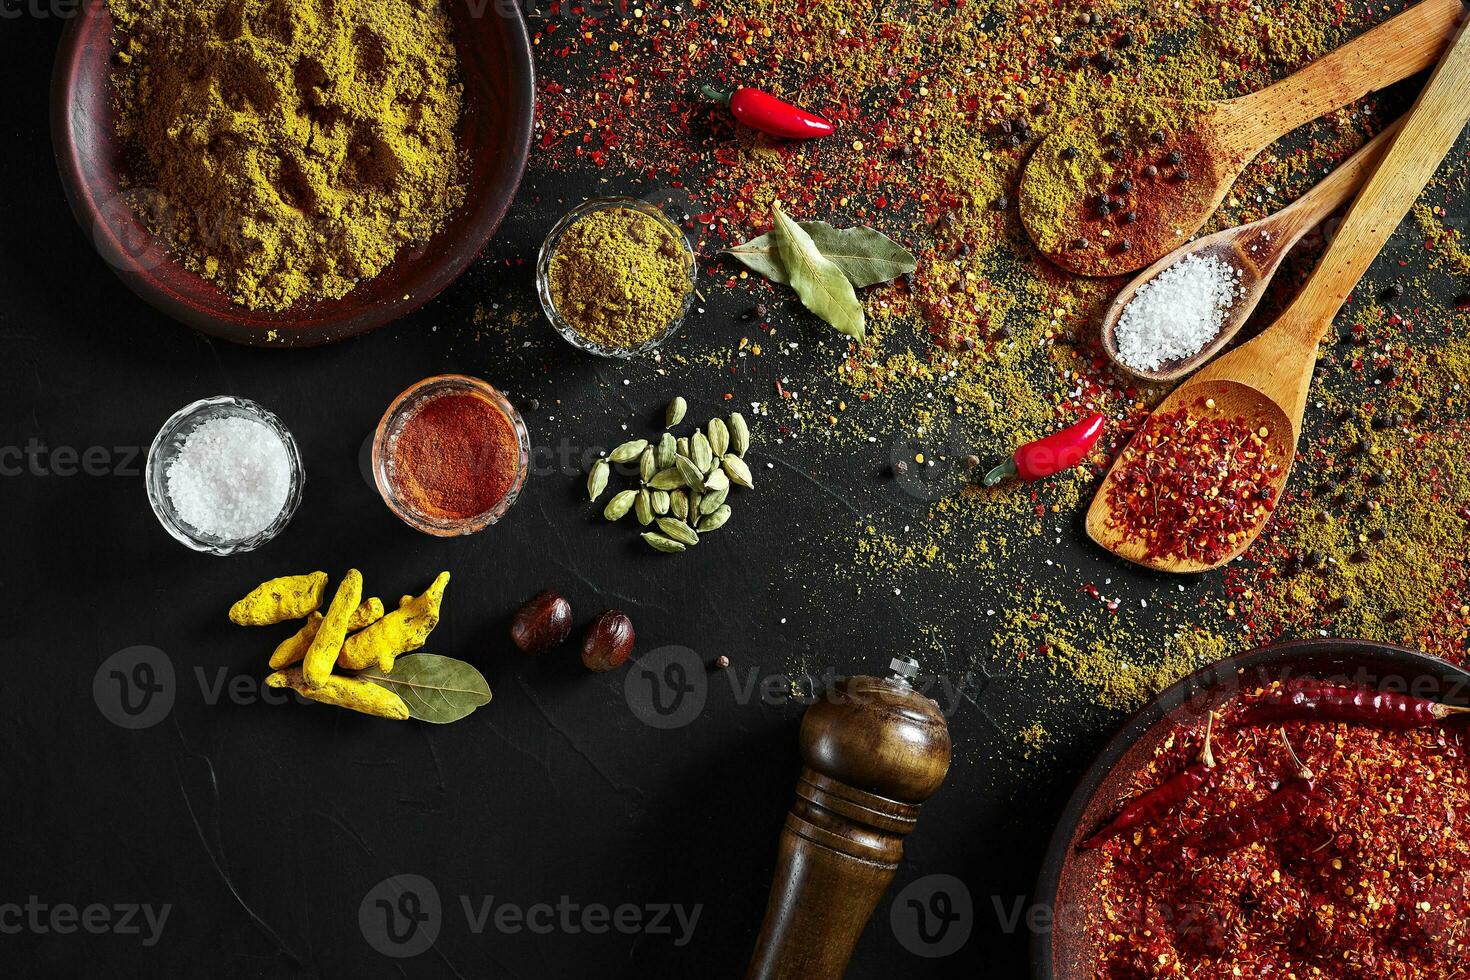 Set of indian spices on black background - green cardamom, turmeric powder, coriander seeds, cumin, and chili, top view photo